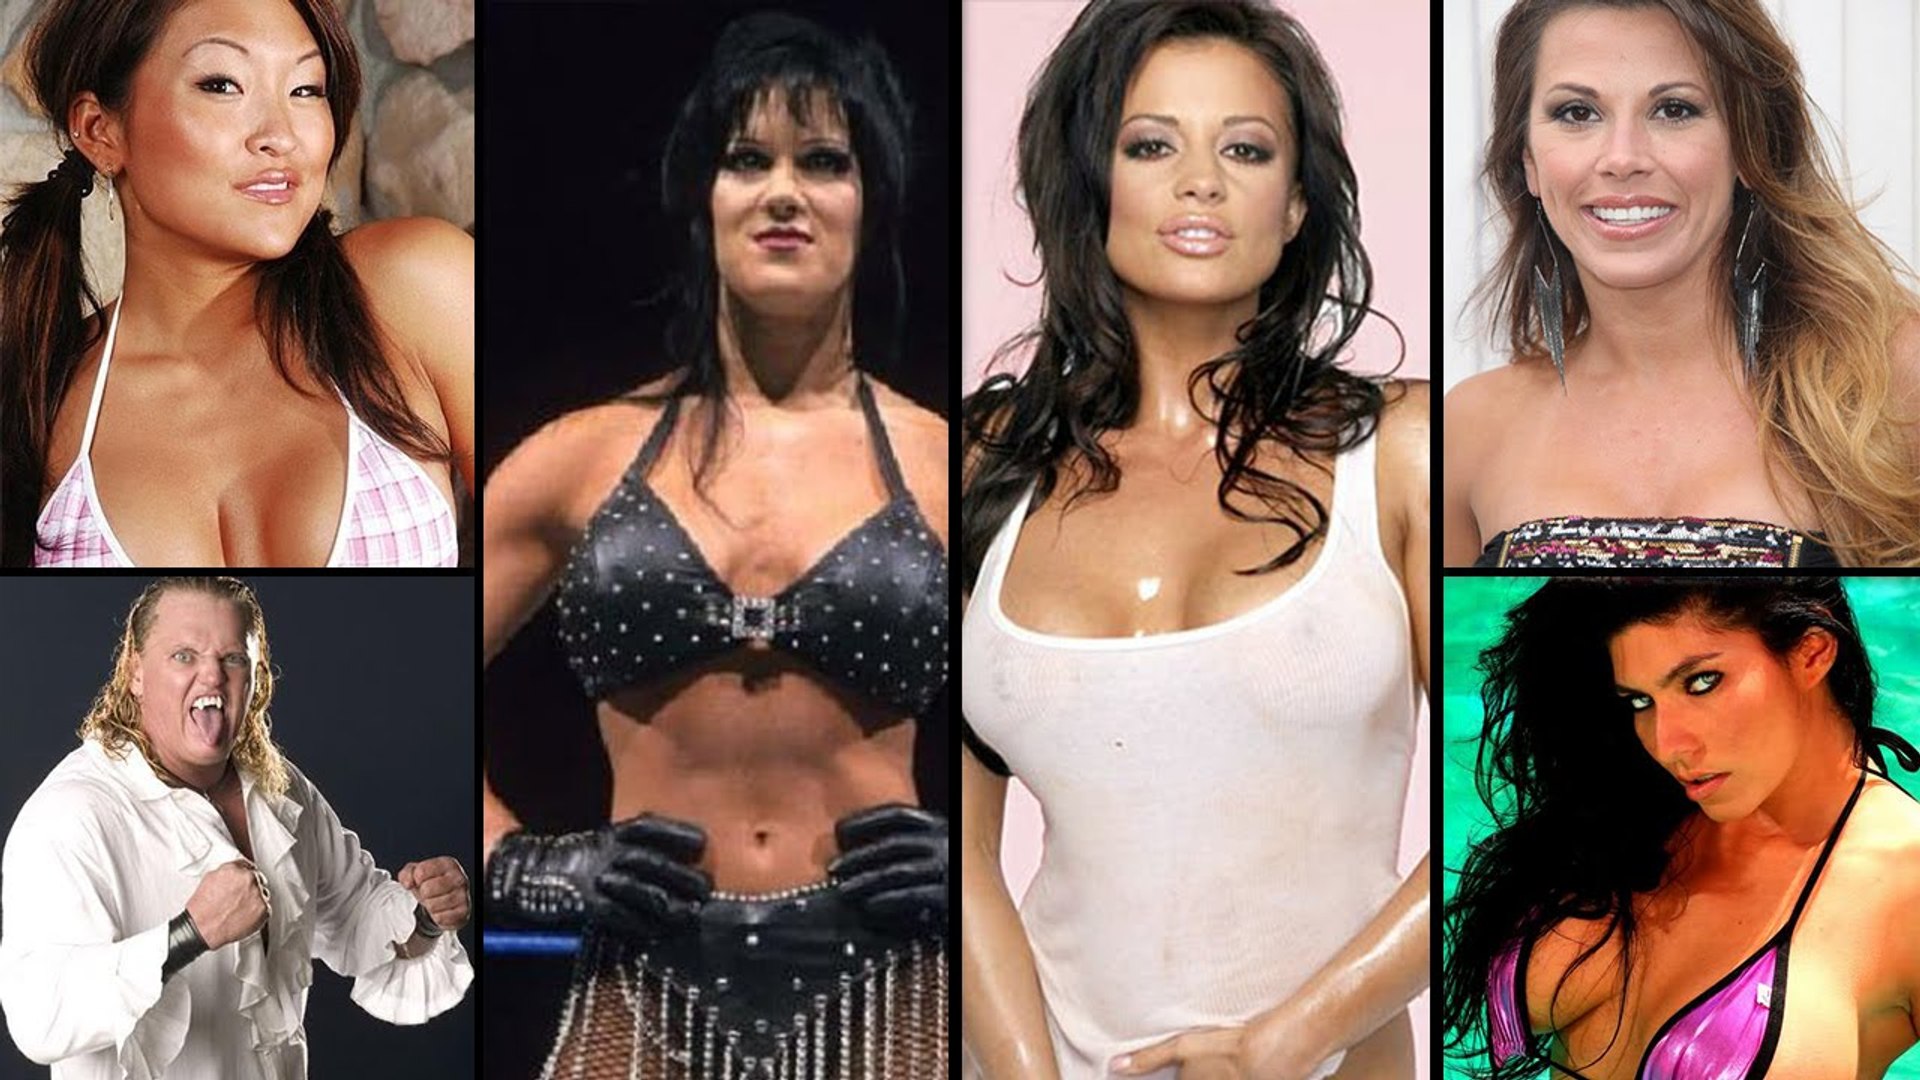 Wwe - 13 WRESTLERS WHO DID PORN! 18+ ONLY - video Dailymotion